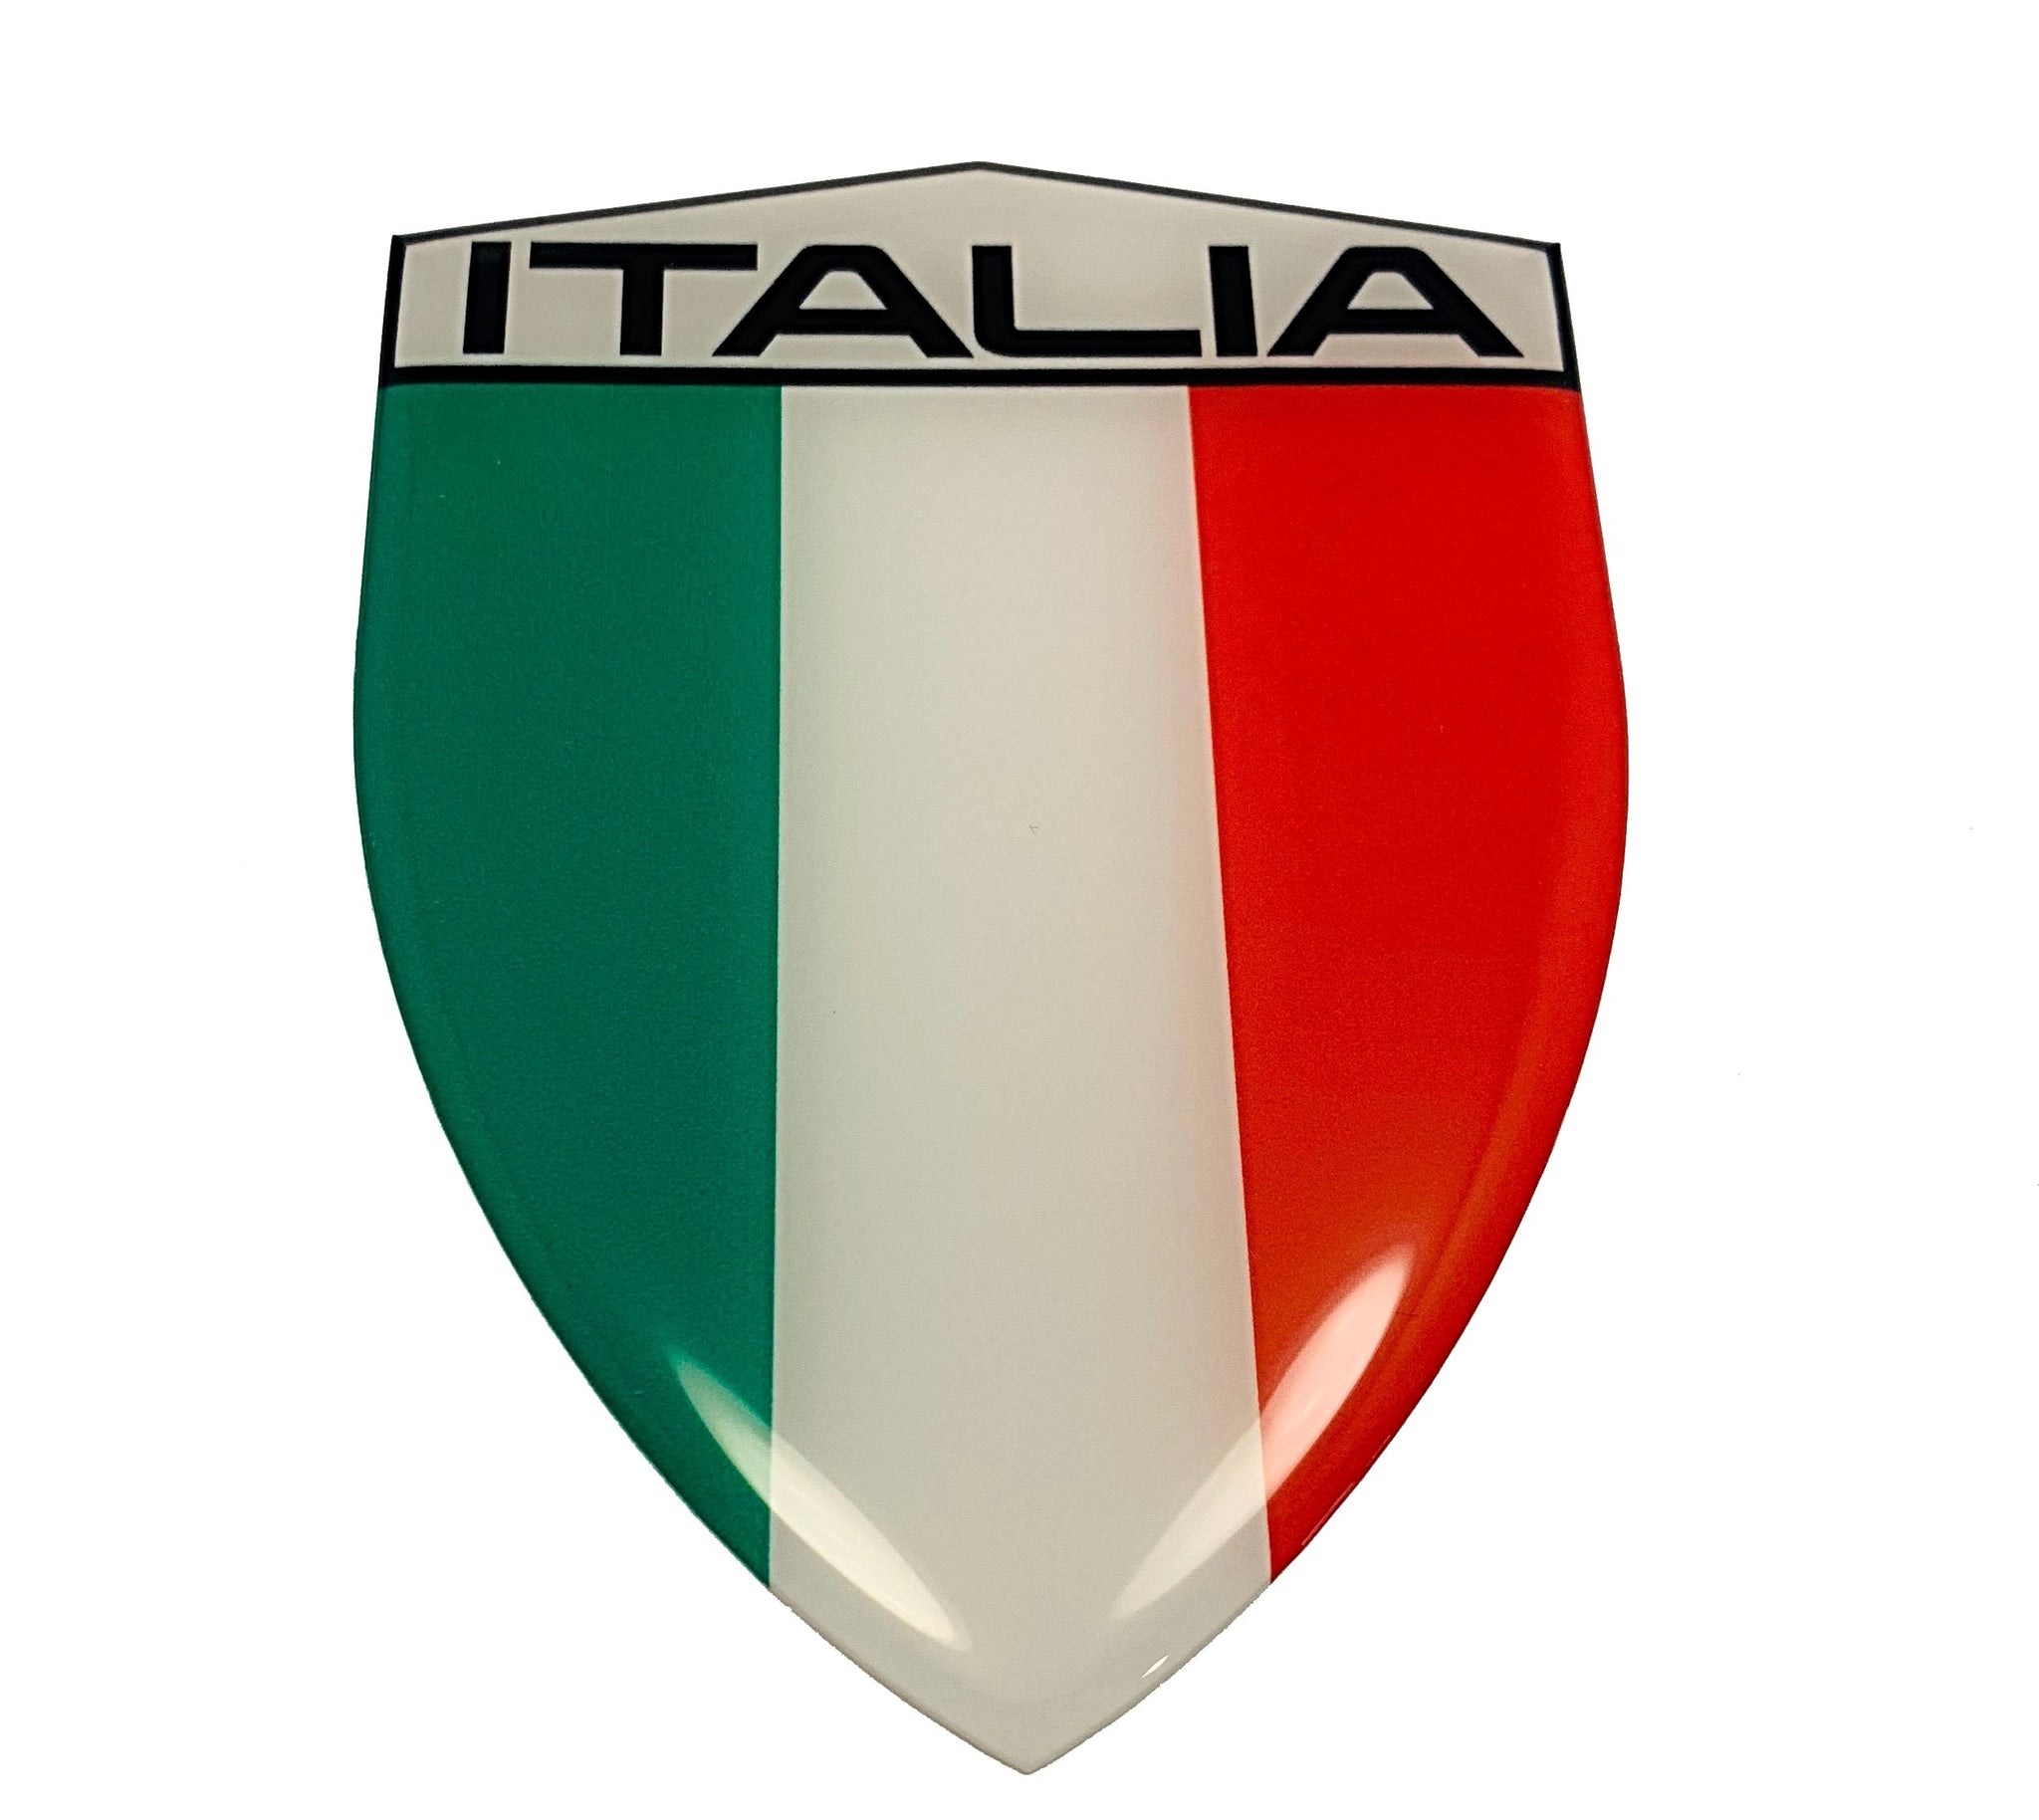 ITALIAN ITALY FLAG CAR & MOTORCYCLE RAISED CLEAR LENS STICKER DECAL LG  3.2x 4.36 – 3D Lettering Boats Lettering